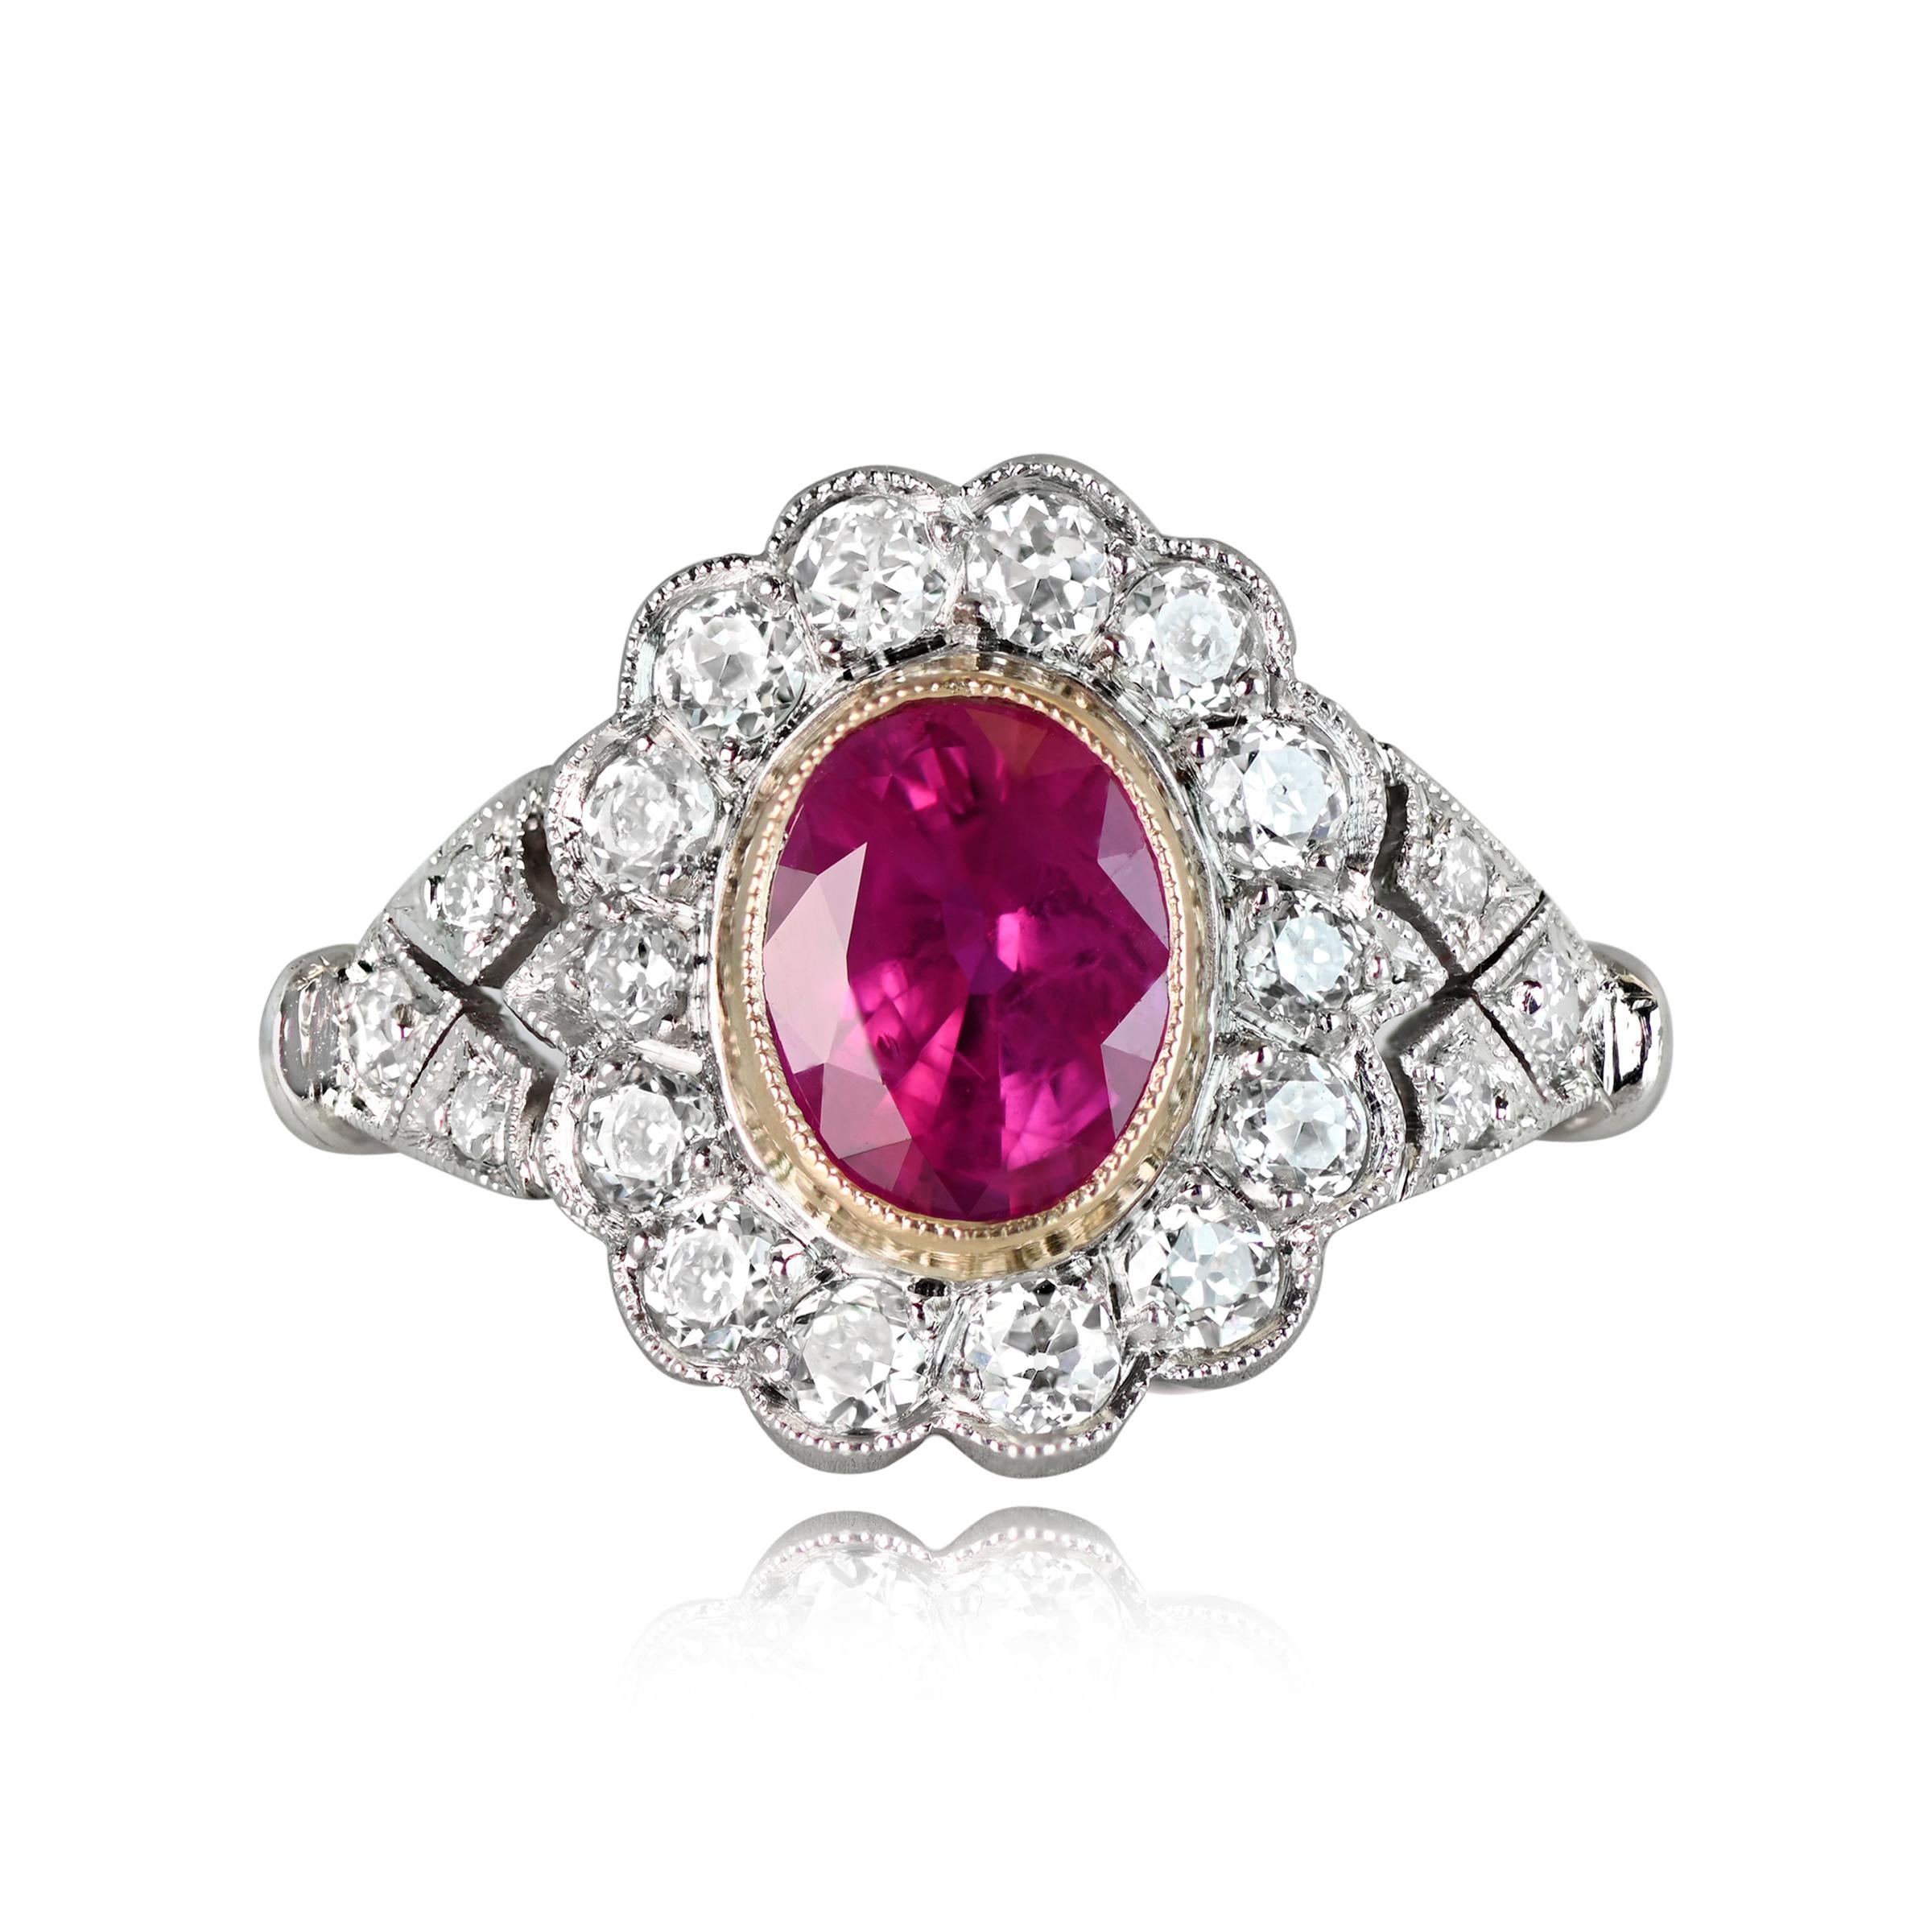 A captivating floral motif ring showcases a GIA-certified oval-cut 1.26 carat natural Burma ruby, encased in an elegant 18k yellow gold bezel. Surrounding the ruby is a mesmerizing floral halo of old European cut diamonds, artfully half-bezel set.